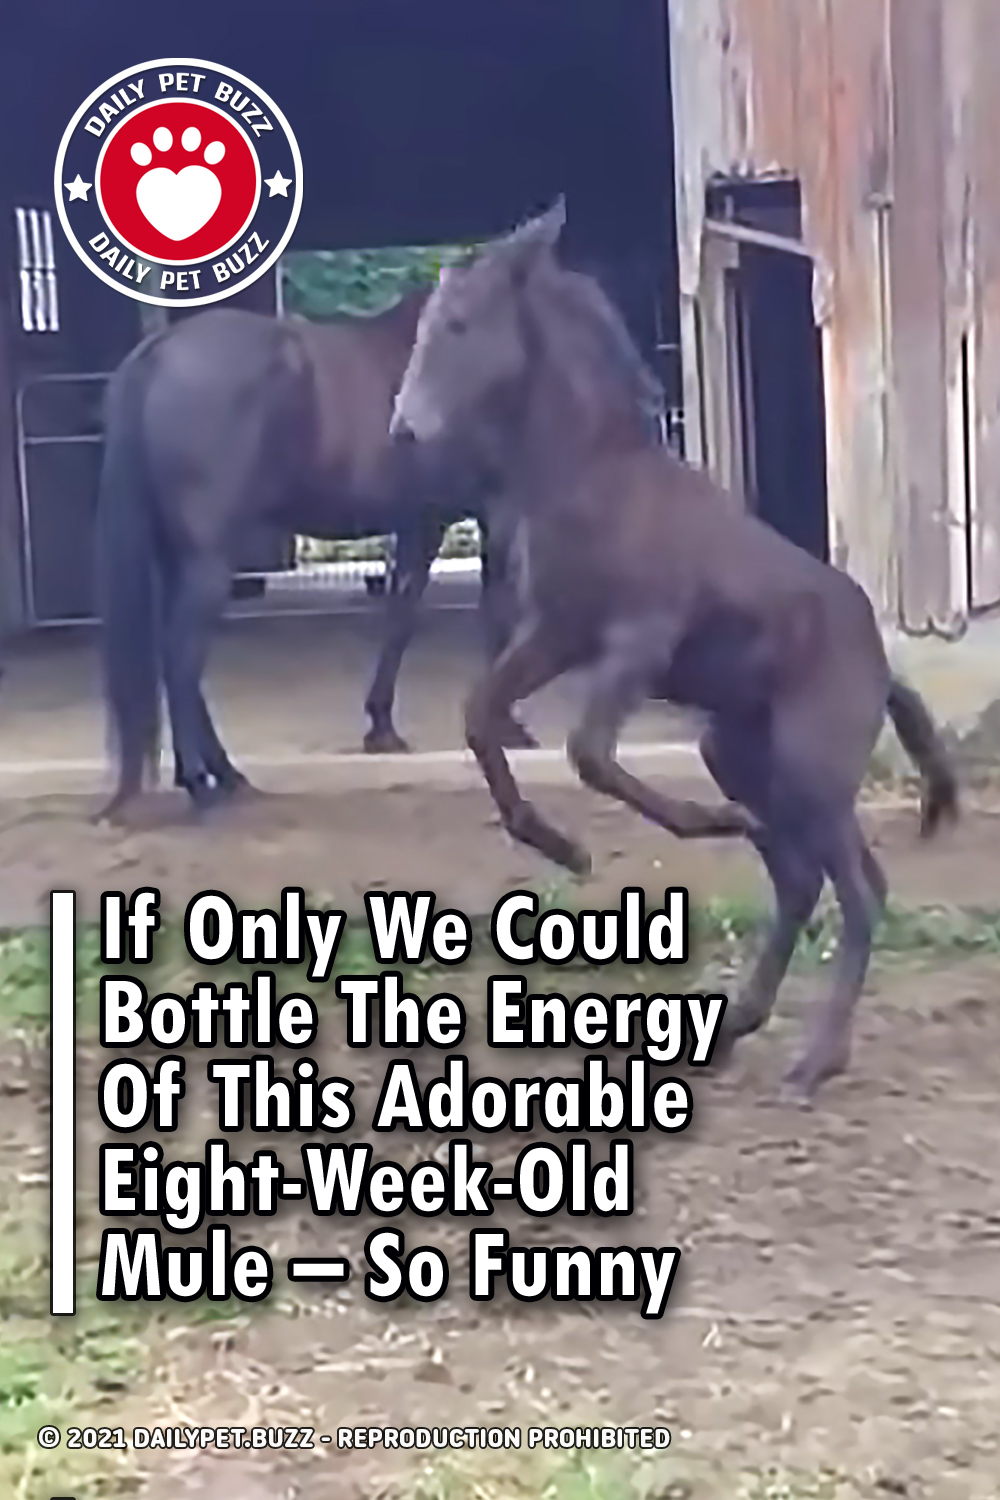 If Only We Could Bottle The Energy Of This Adorable Eight-Week-Old Mule – So Funny